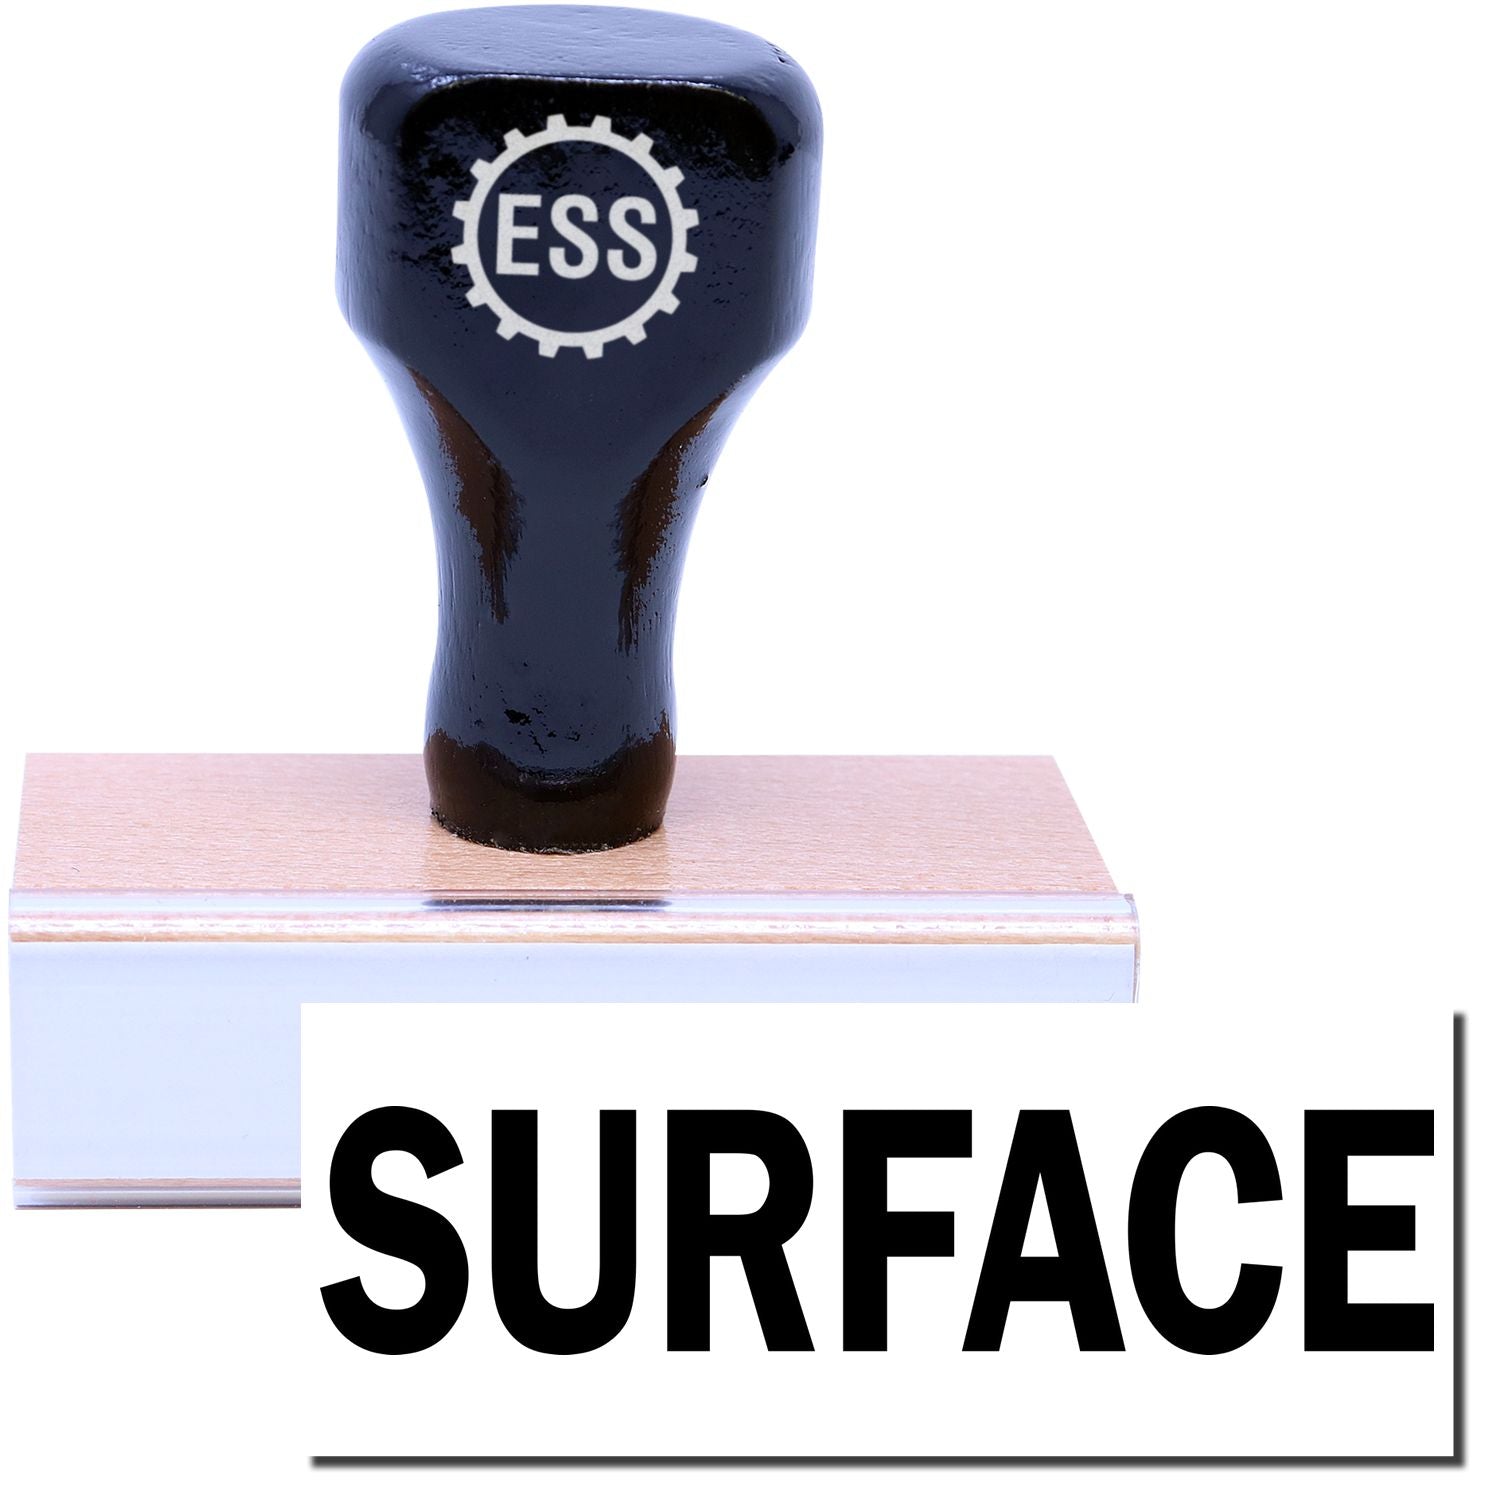 A stock office rubber stamp with a stamped image showing how the text "SURFACE" in a large font is displayed after stamping.